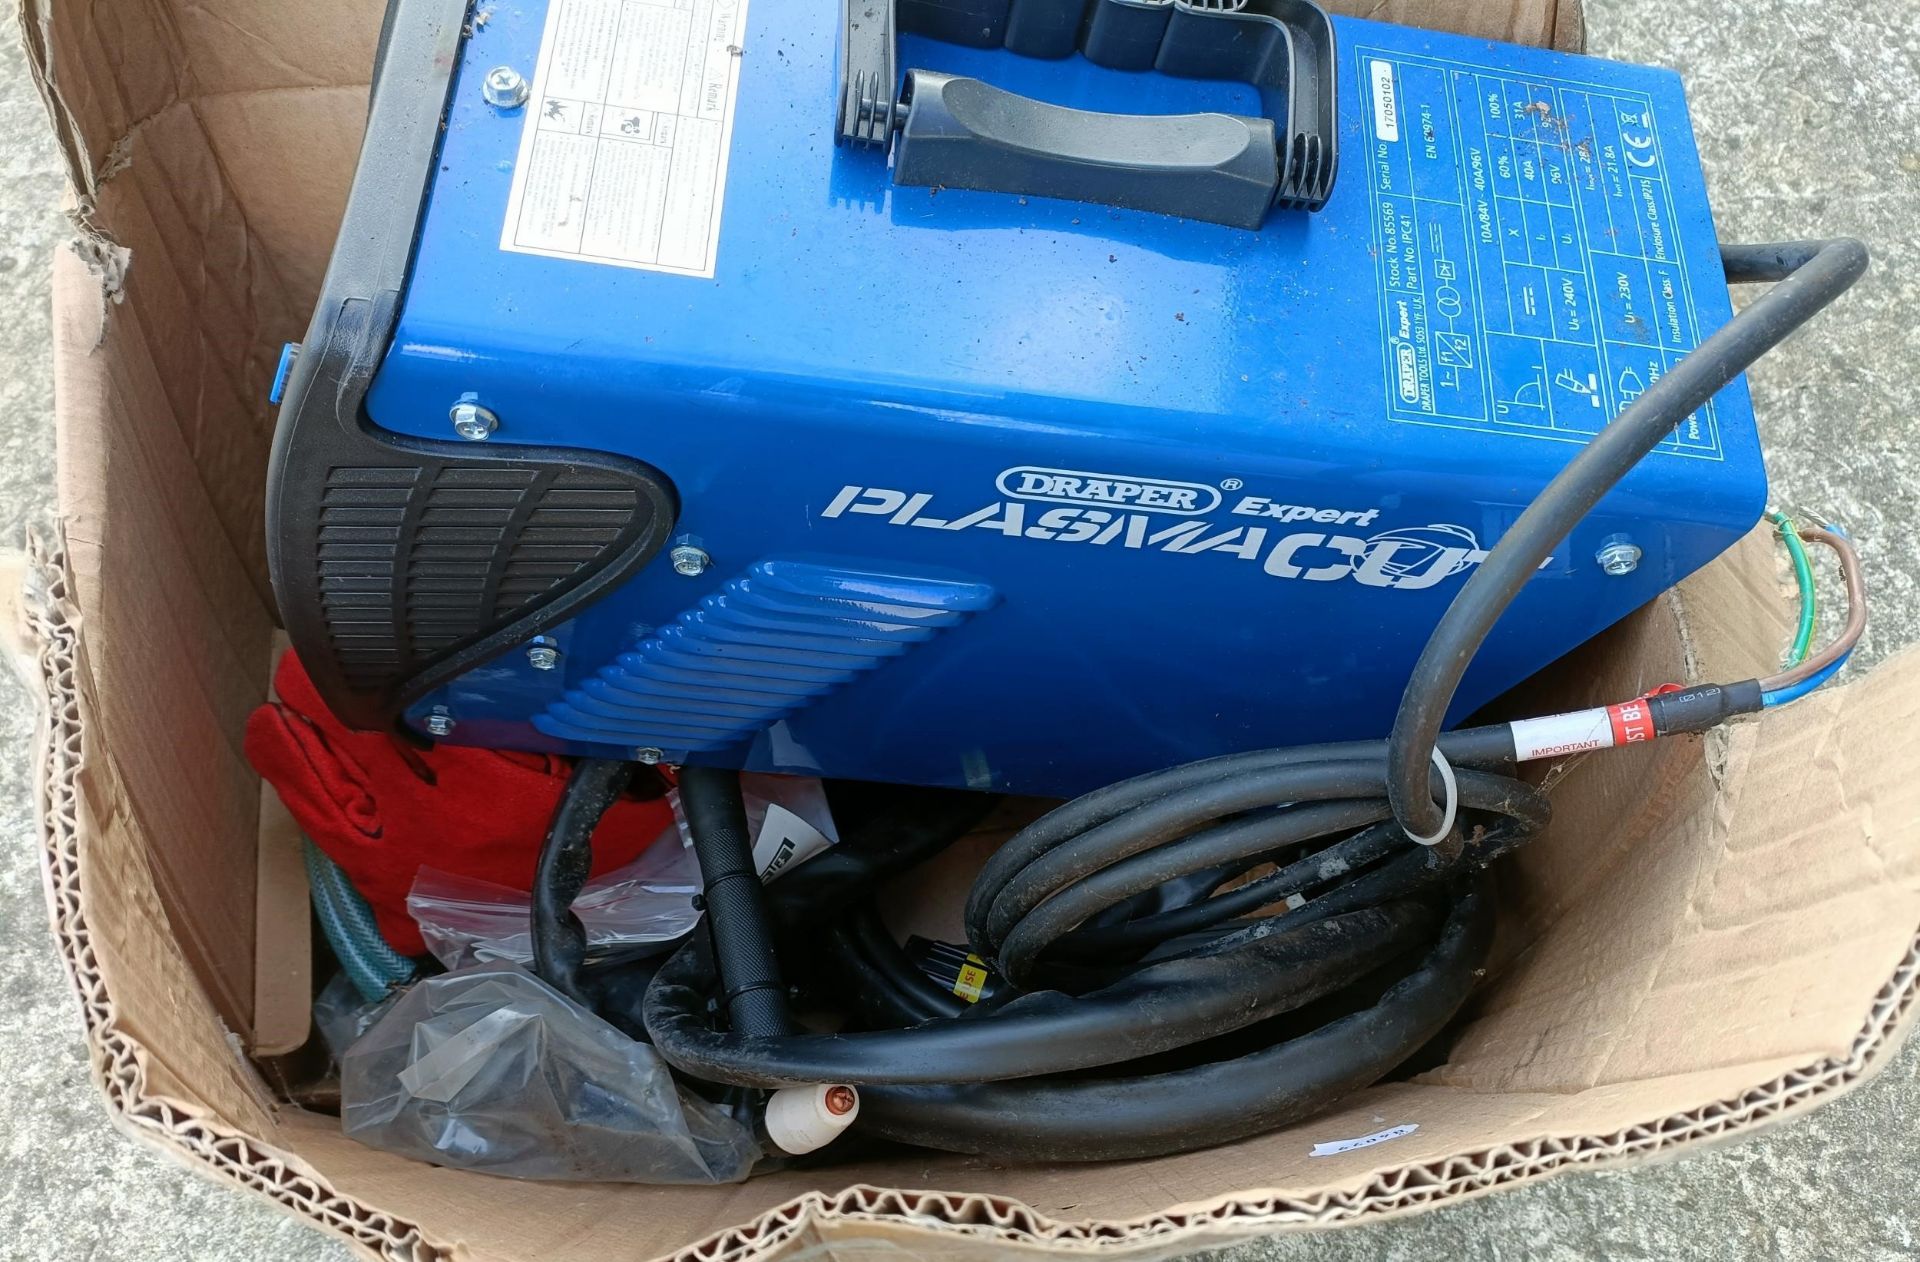 Draper Plasma cutter and accessories Being sold without reserve From a Southampton deceased estate - Image 4 of 4